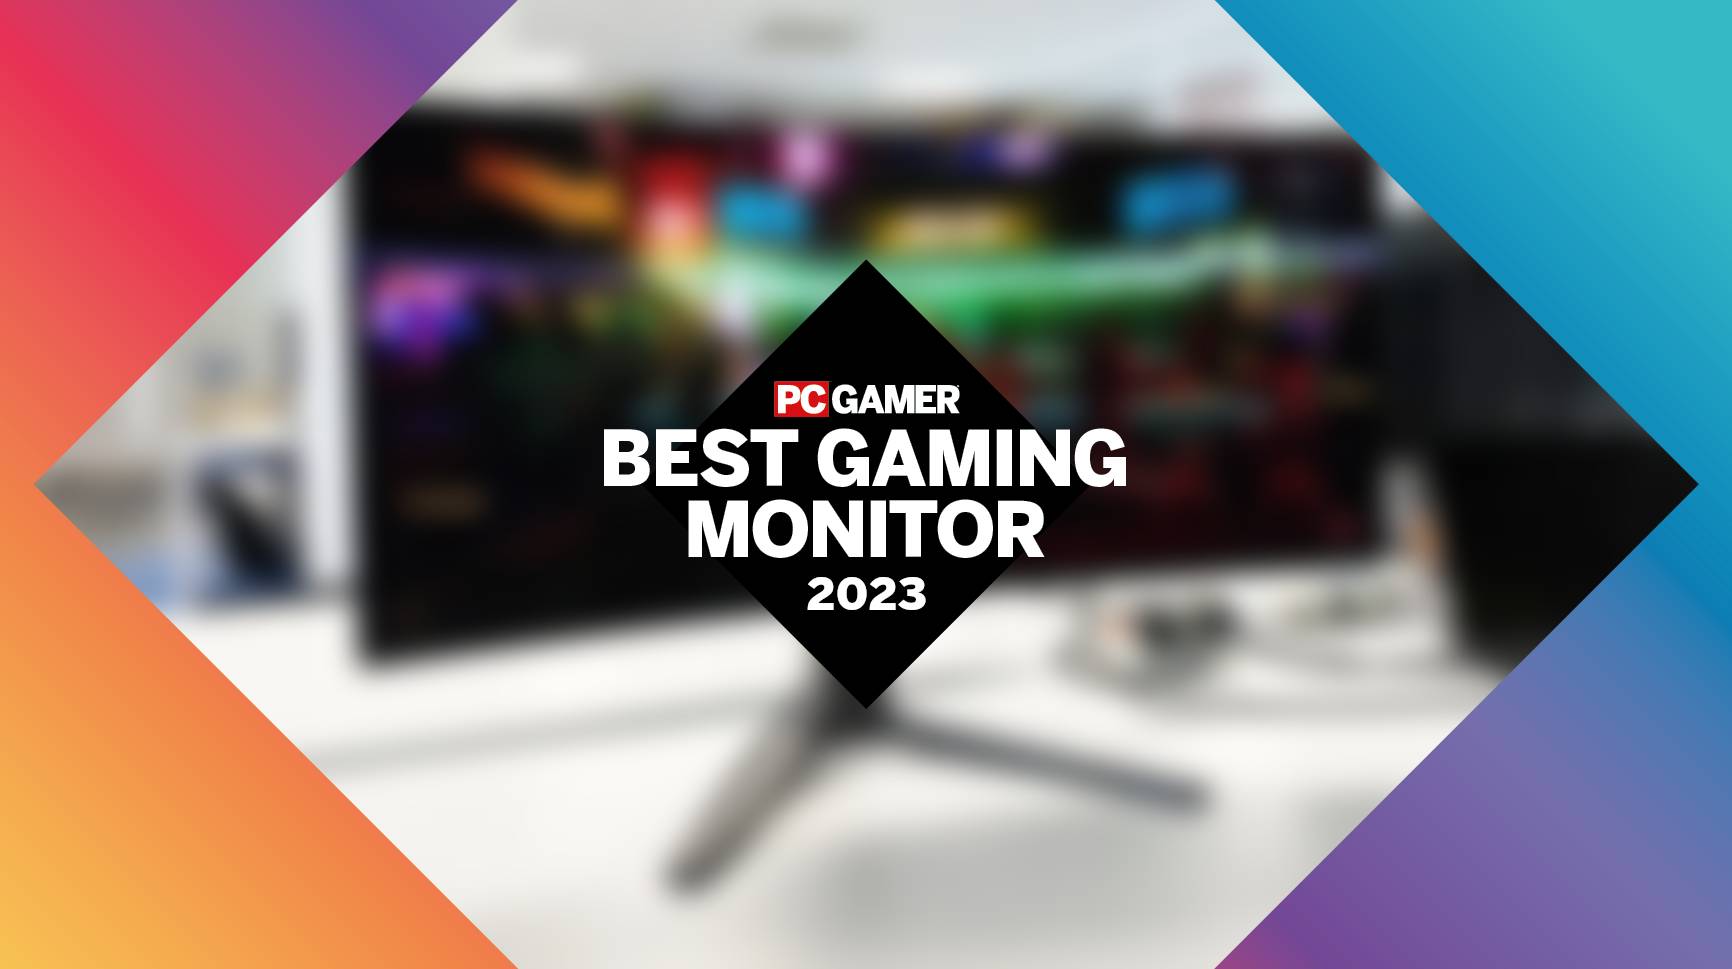  PC Gamer Hardware Awards: The best gaming monitors of 2023 